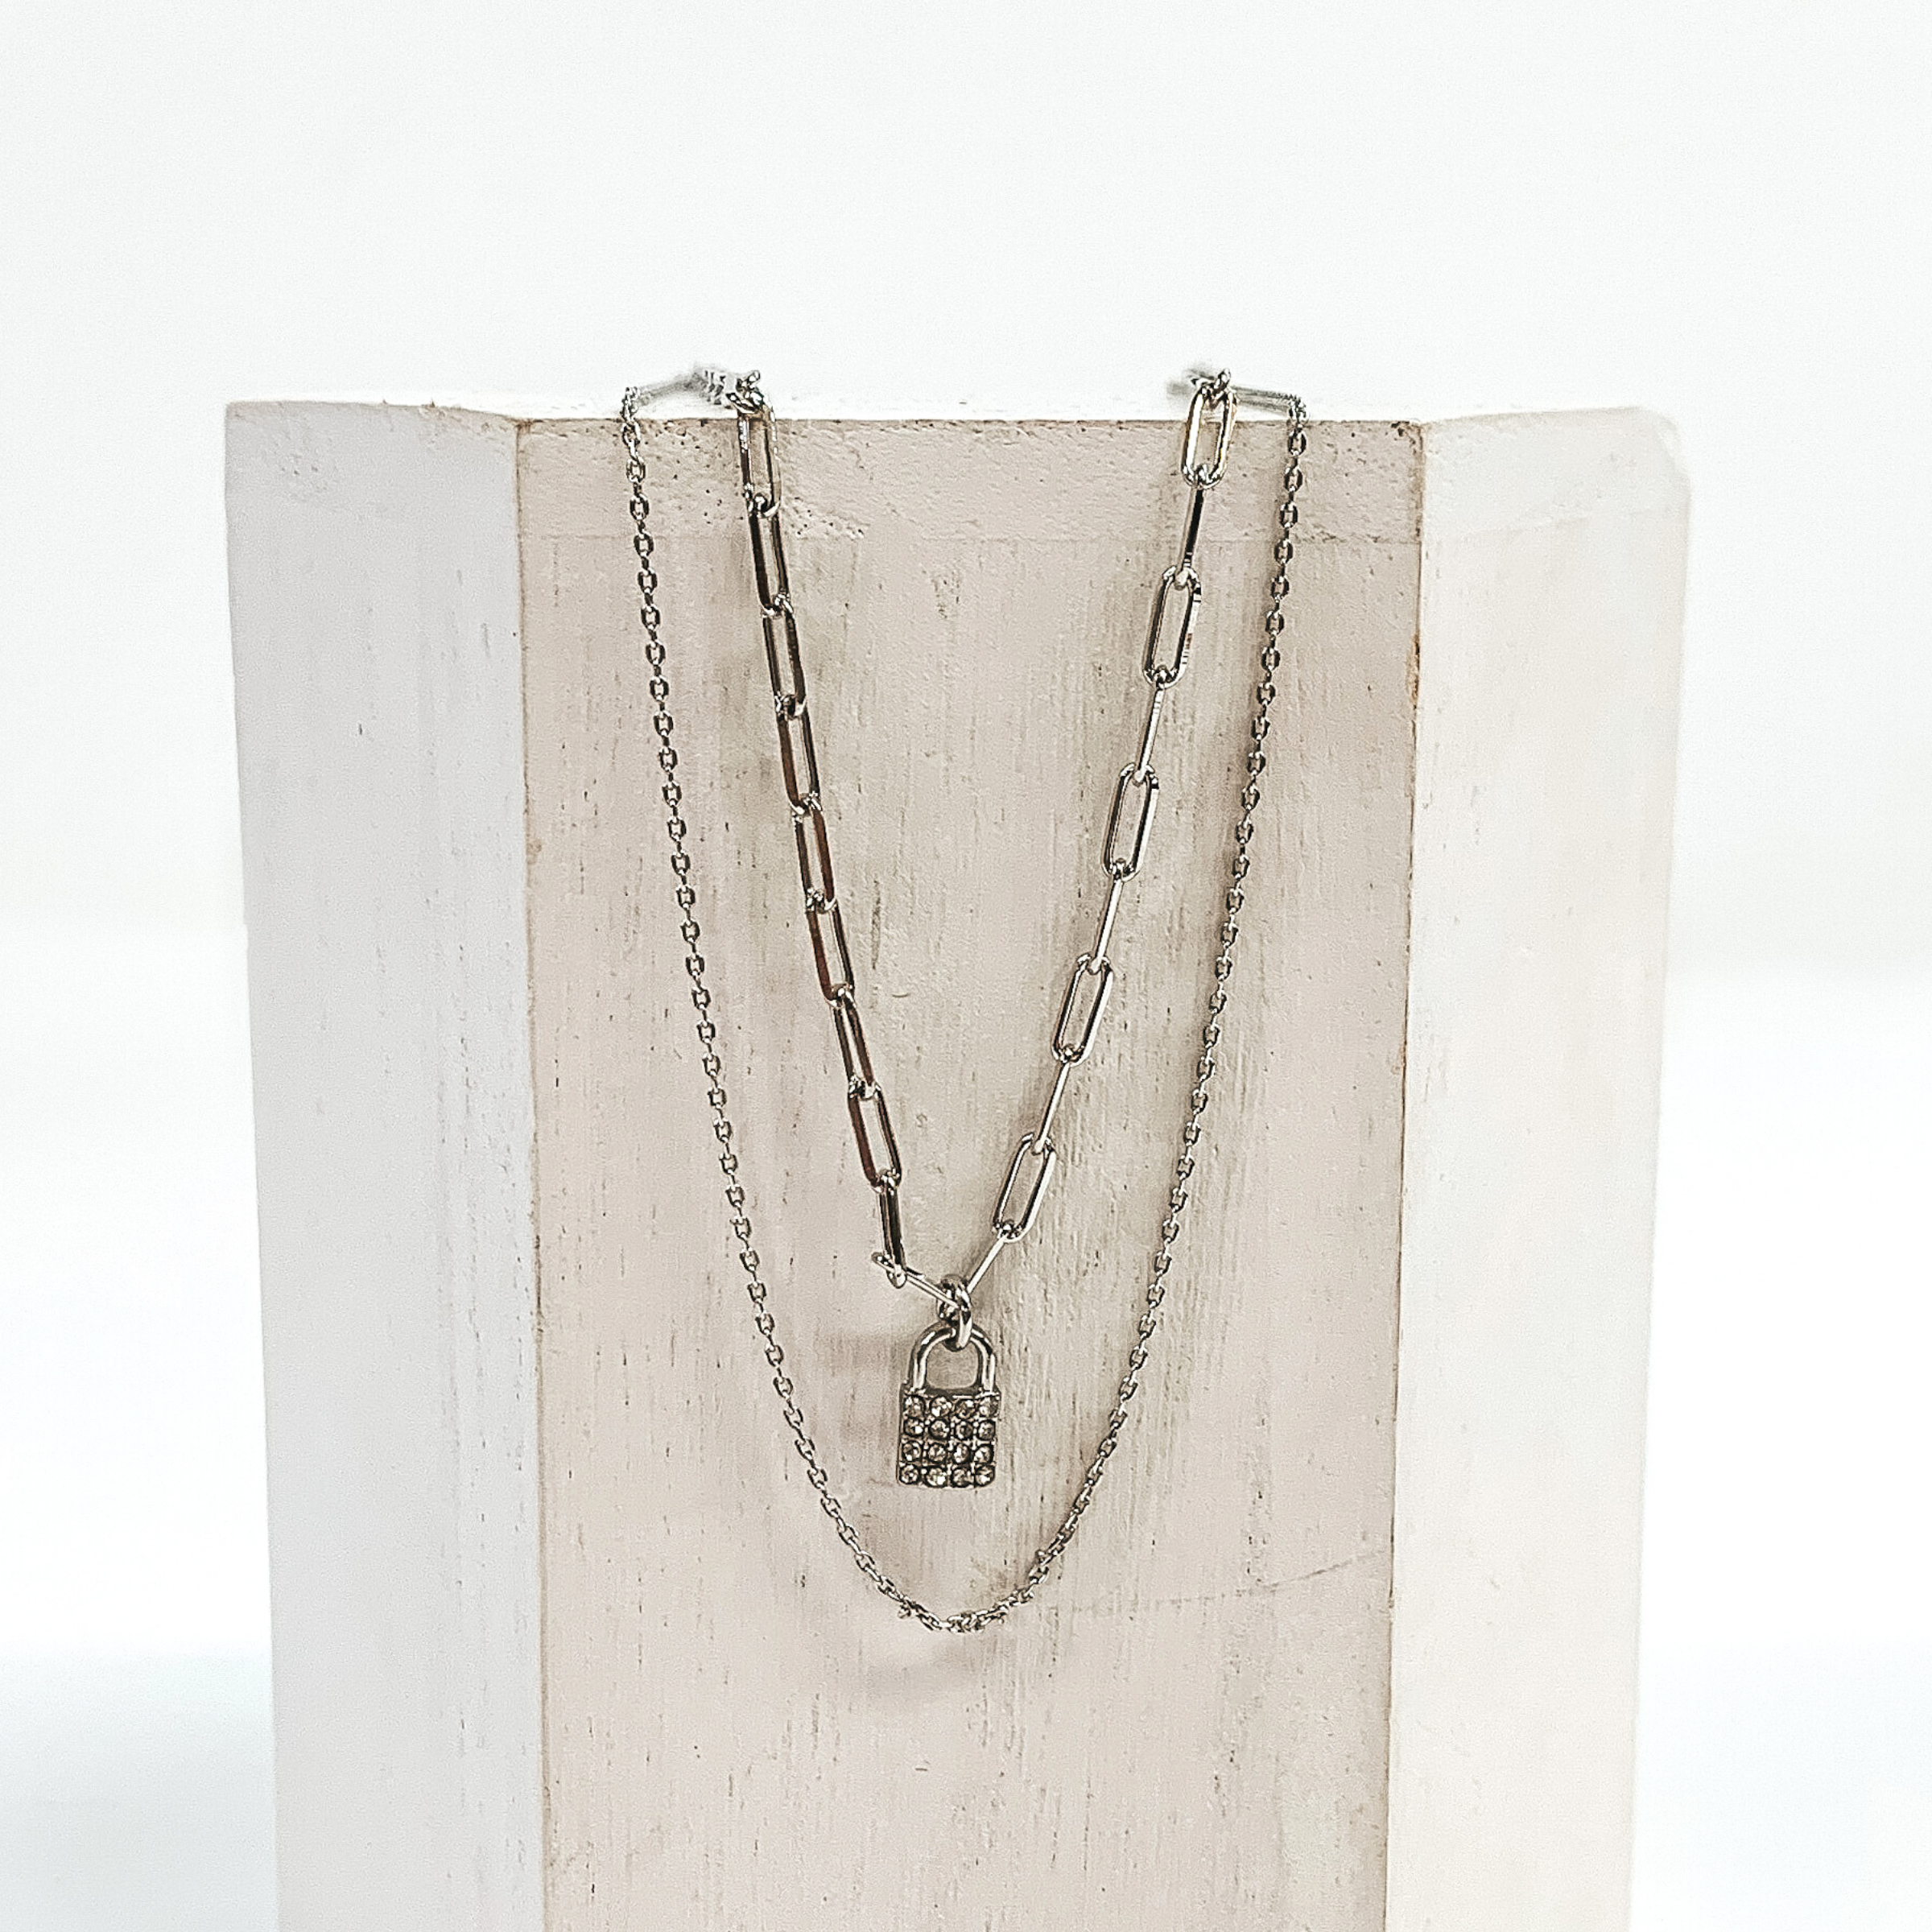 Silver, double stranded necklace. The longer chain is a plain silver chain. The shorter paperclip chain has a crystalized lock charm. This necklace is pictured laying on a white block on a white background.